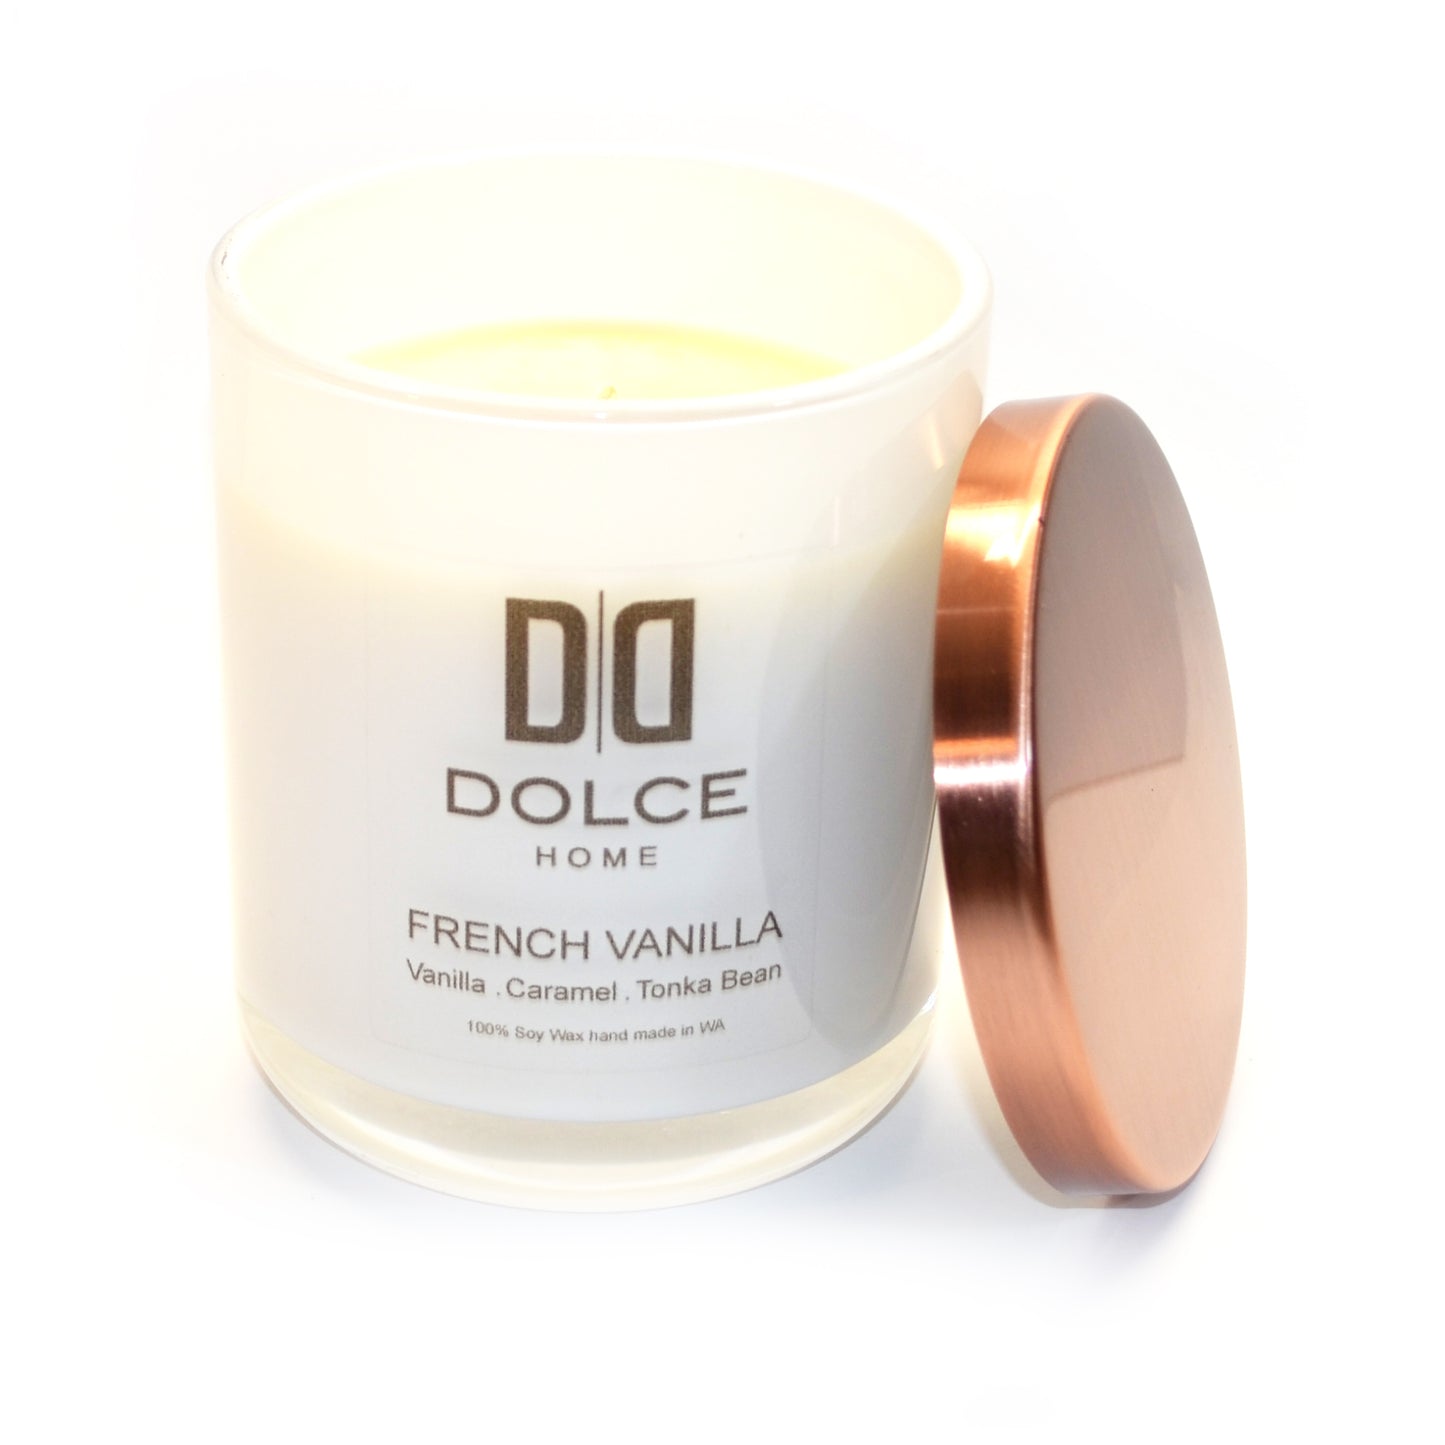 French Vanilla | 300g Soy Wax Candle | Dolce Home | Handmade in W.A.